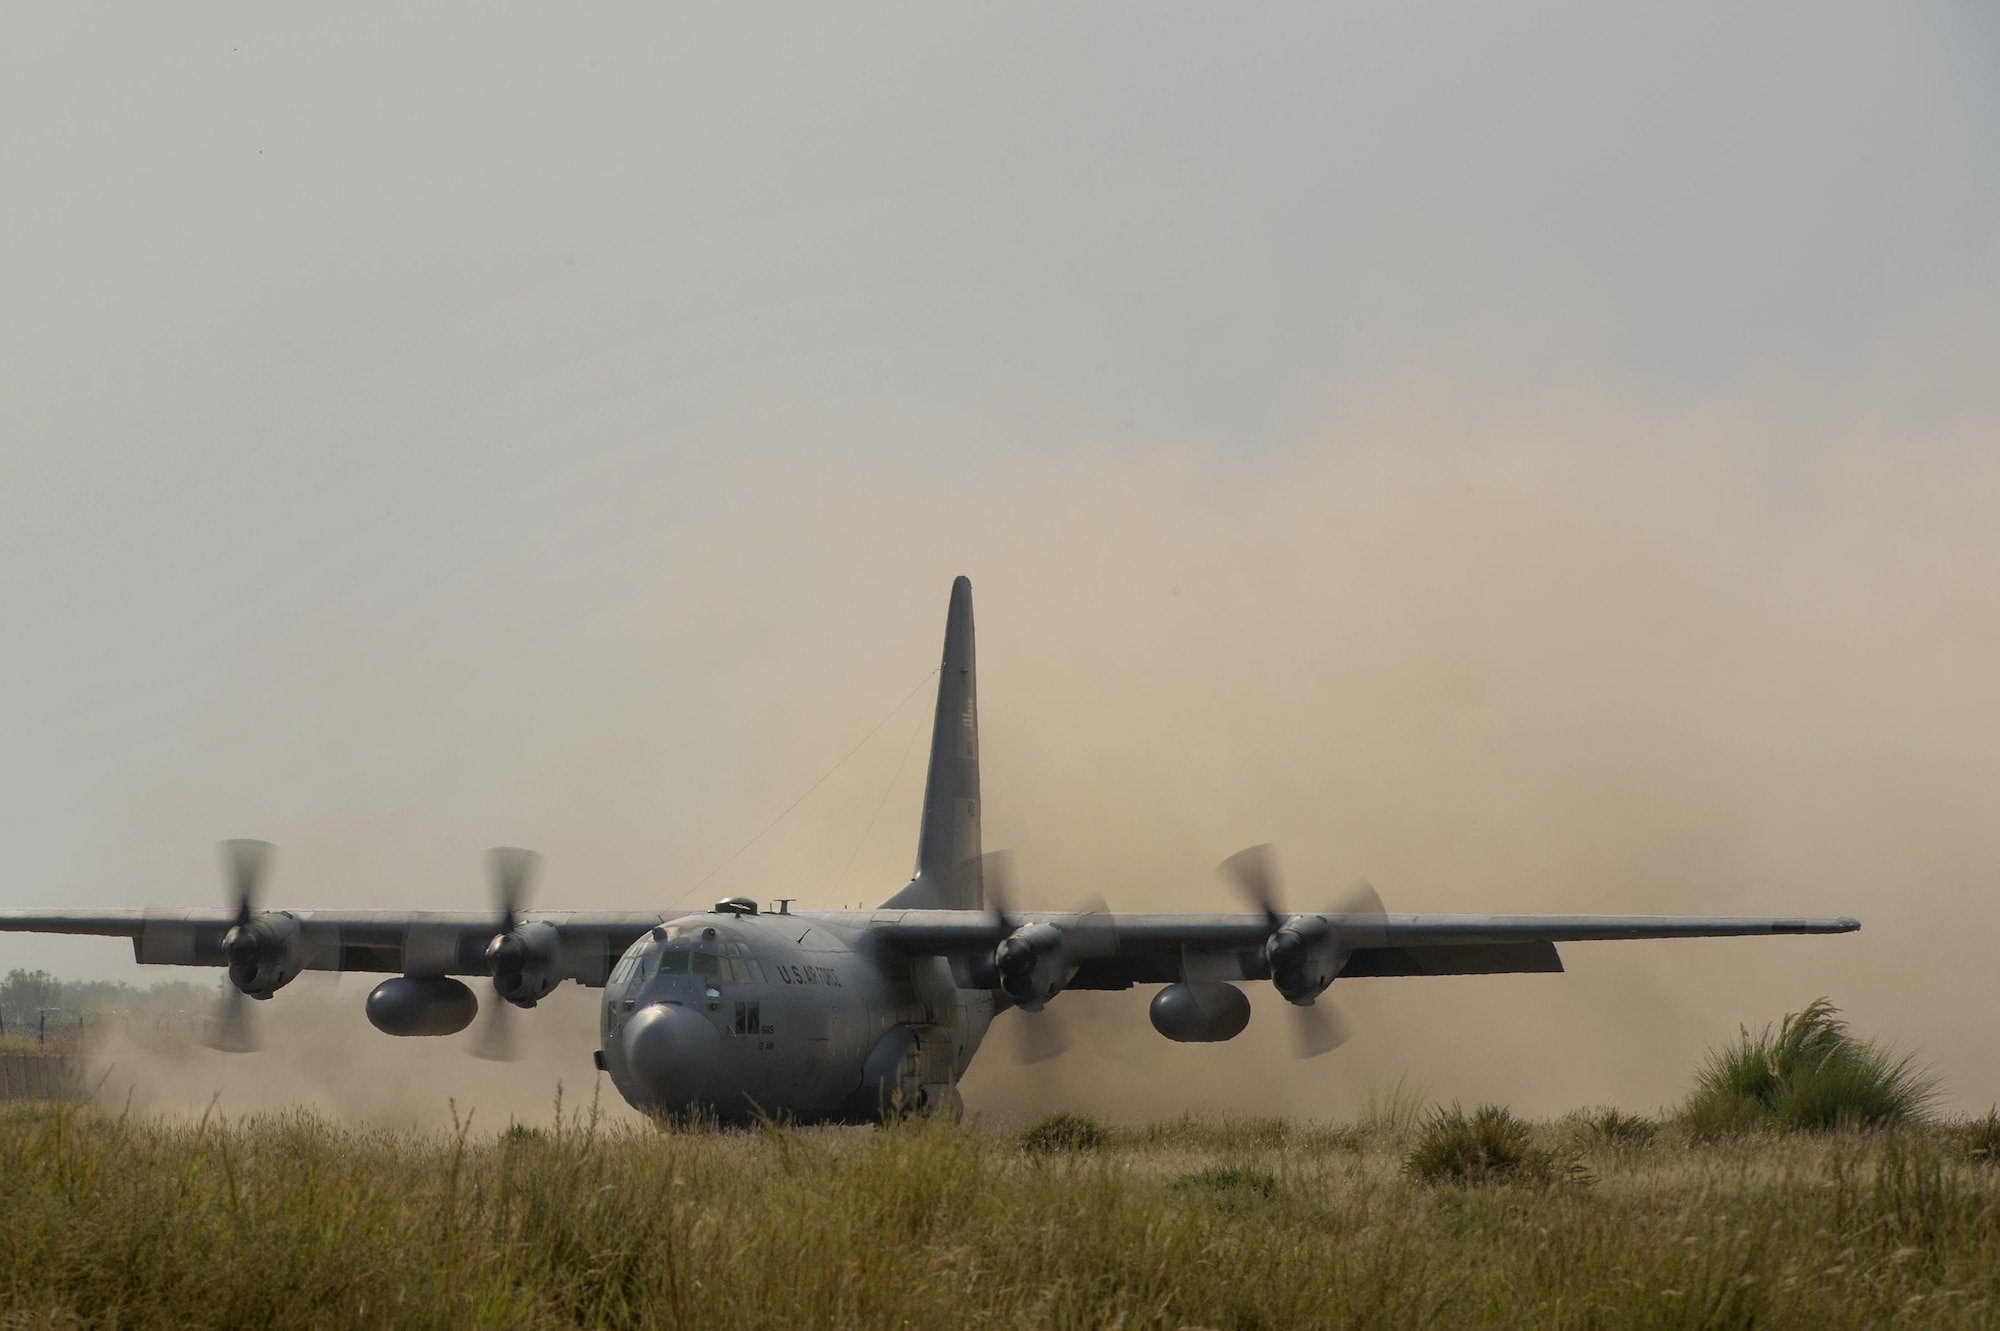 A 774th Expeditionary Airlift Squadron C-130 Hercules cargo plane kicks up dirt on a short runway landing at Forward Operating Base Salerno, Khost province, Afghanistan, Sept. 21, 2013. The 19th Movement Control Team, a small squadron of Air Force surface movement controllers and aerial porters, have the herculean task of overseeing the vast majority of retrograde operations at FOB Salerno. 
